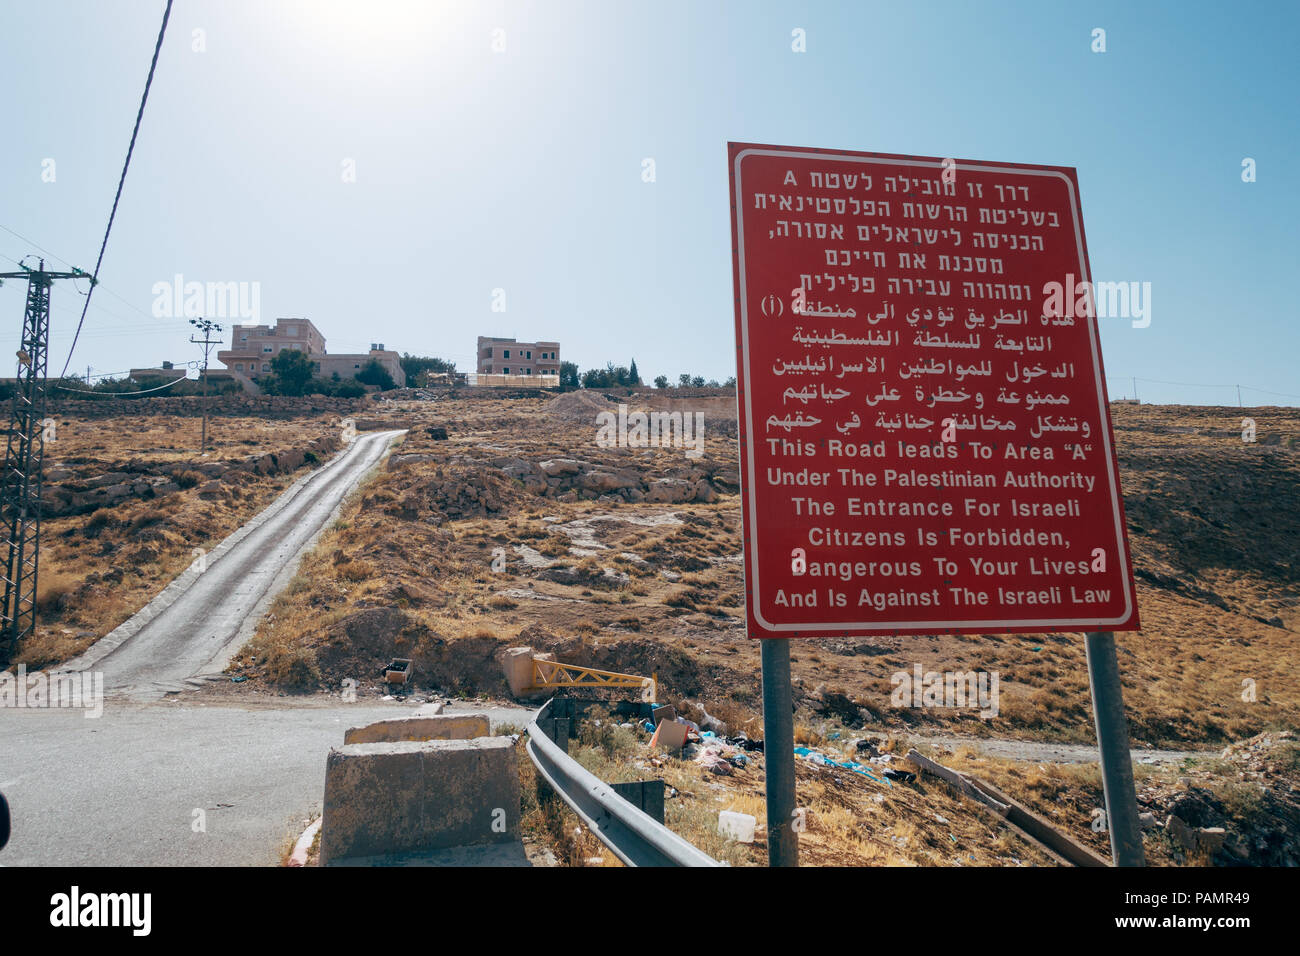 a sign near one of the checkpoints in Hebron, Israel, forbidding Israelis to travel into Palestinian Area A, written in Hebrew, Arabic and English. Stock Photo